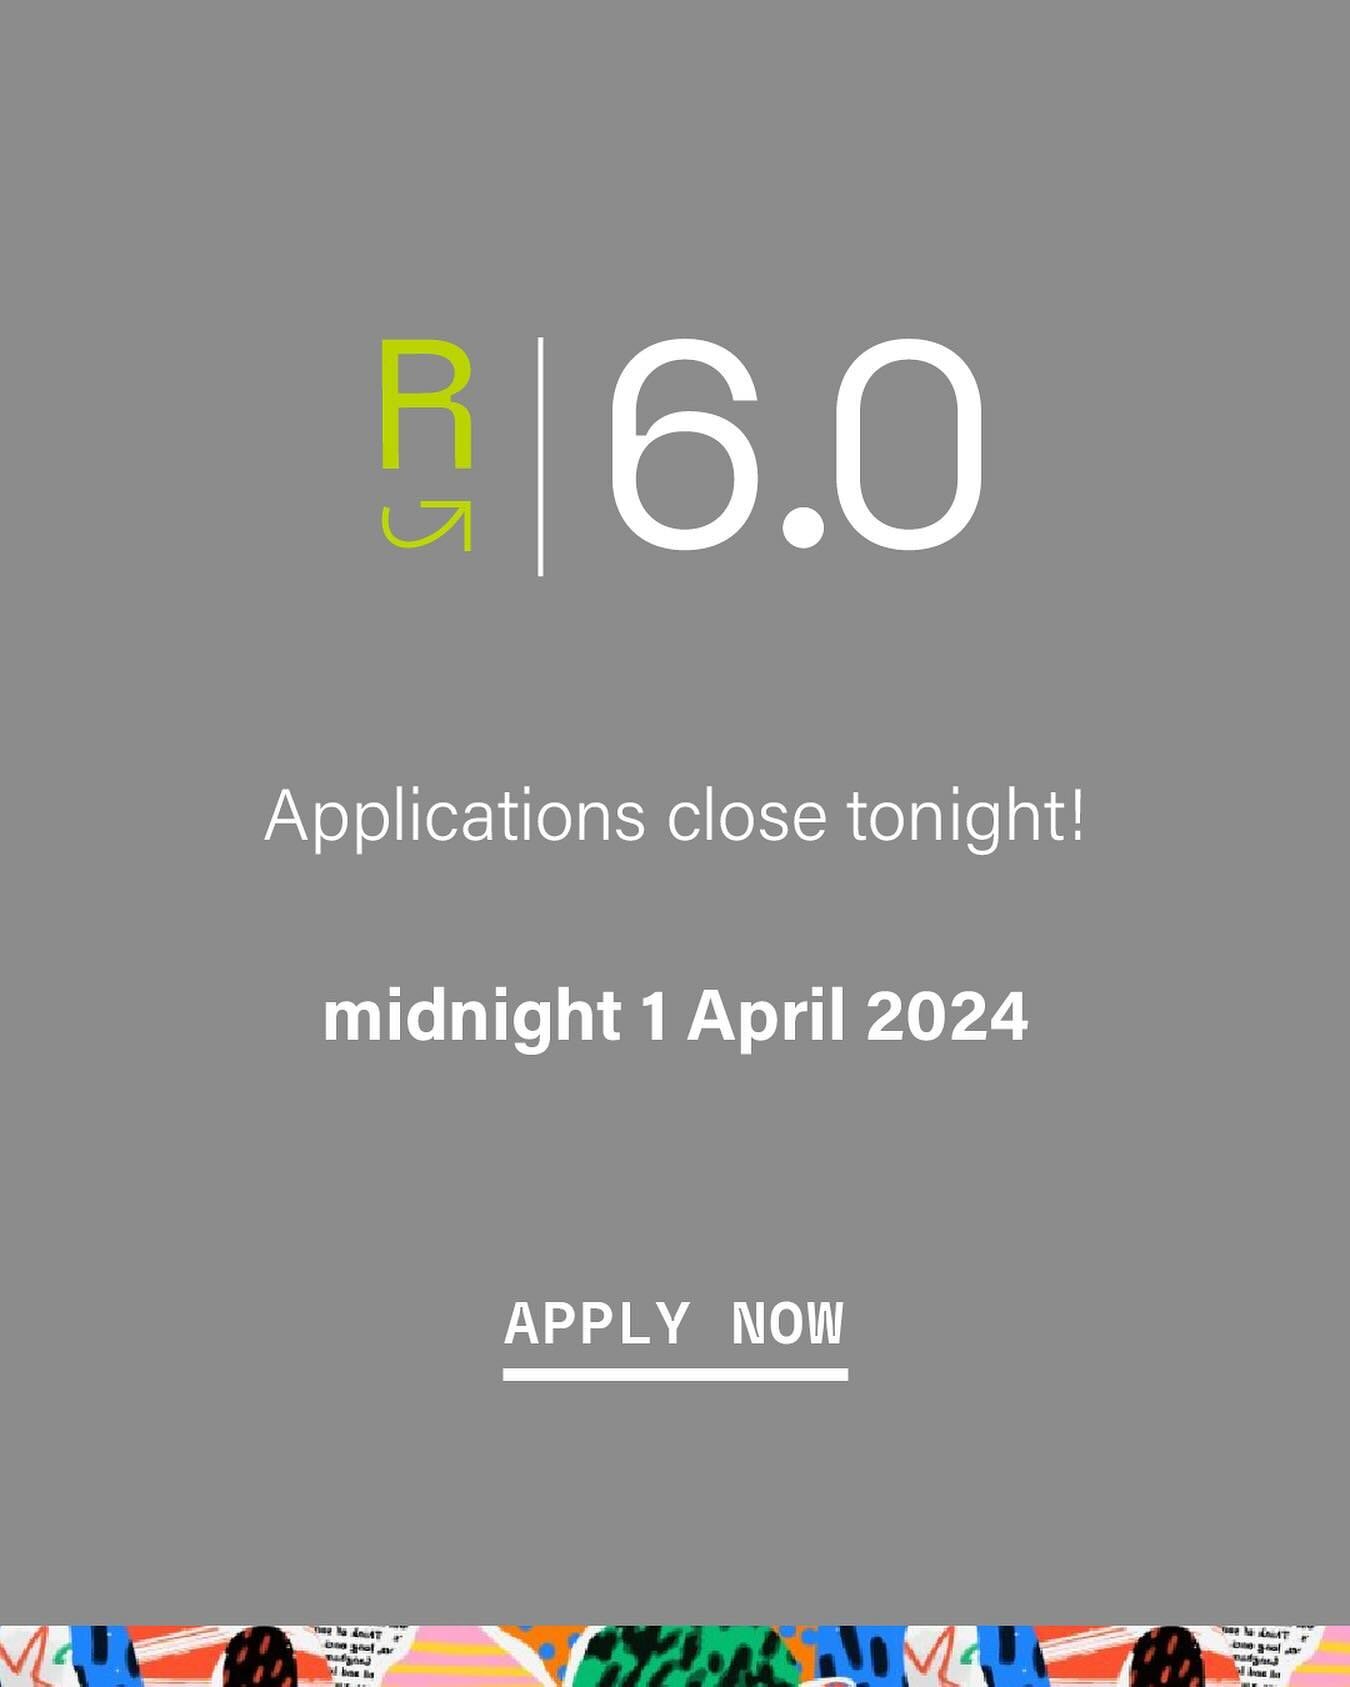 Applications for R|6.0 are closing tonight! 

🌟 If you have any last-minute questions about your application, we&rsquo;re here to help. Send us a DM and let&rsquo;s connect!
.
.
.
R|6.0&nbsp;is an initiative delivered by @scca_org and supported by M